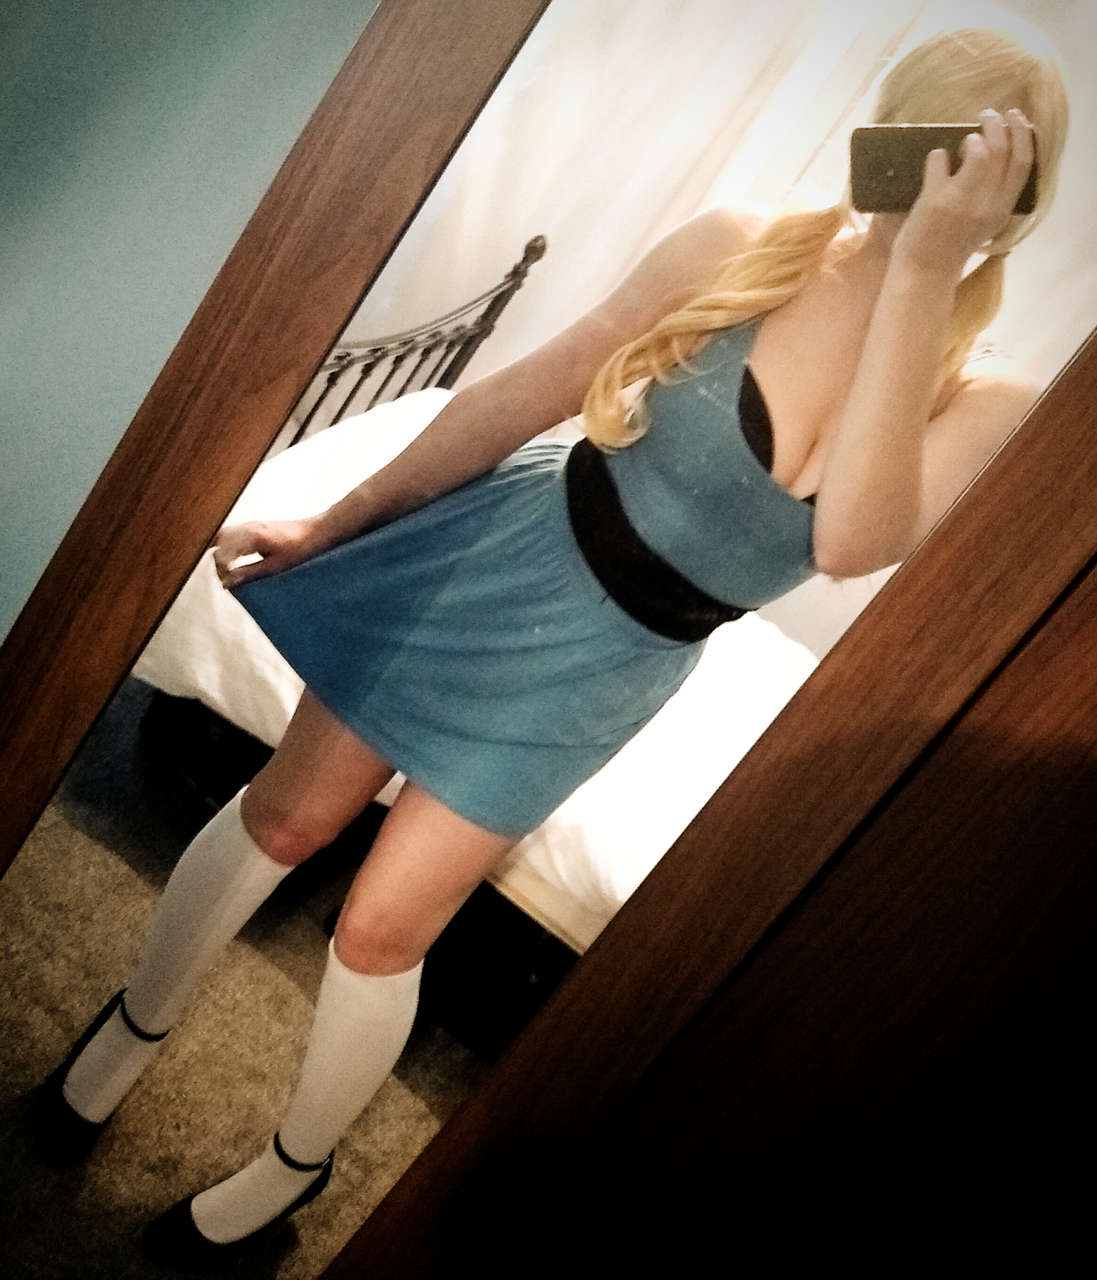 Casual Bubbles Cosplay Mirror Selfie My First Time Cosplaying In 8 Years Clearly Need To Find Some Photography Savvy Friend